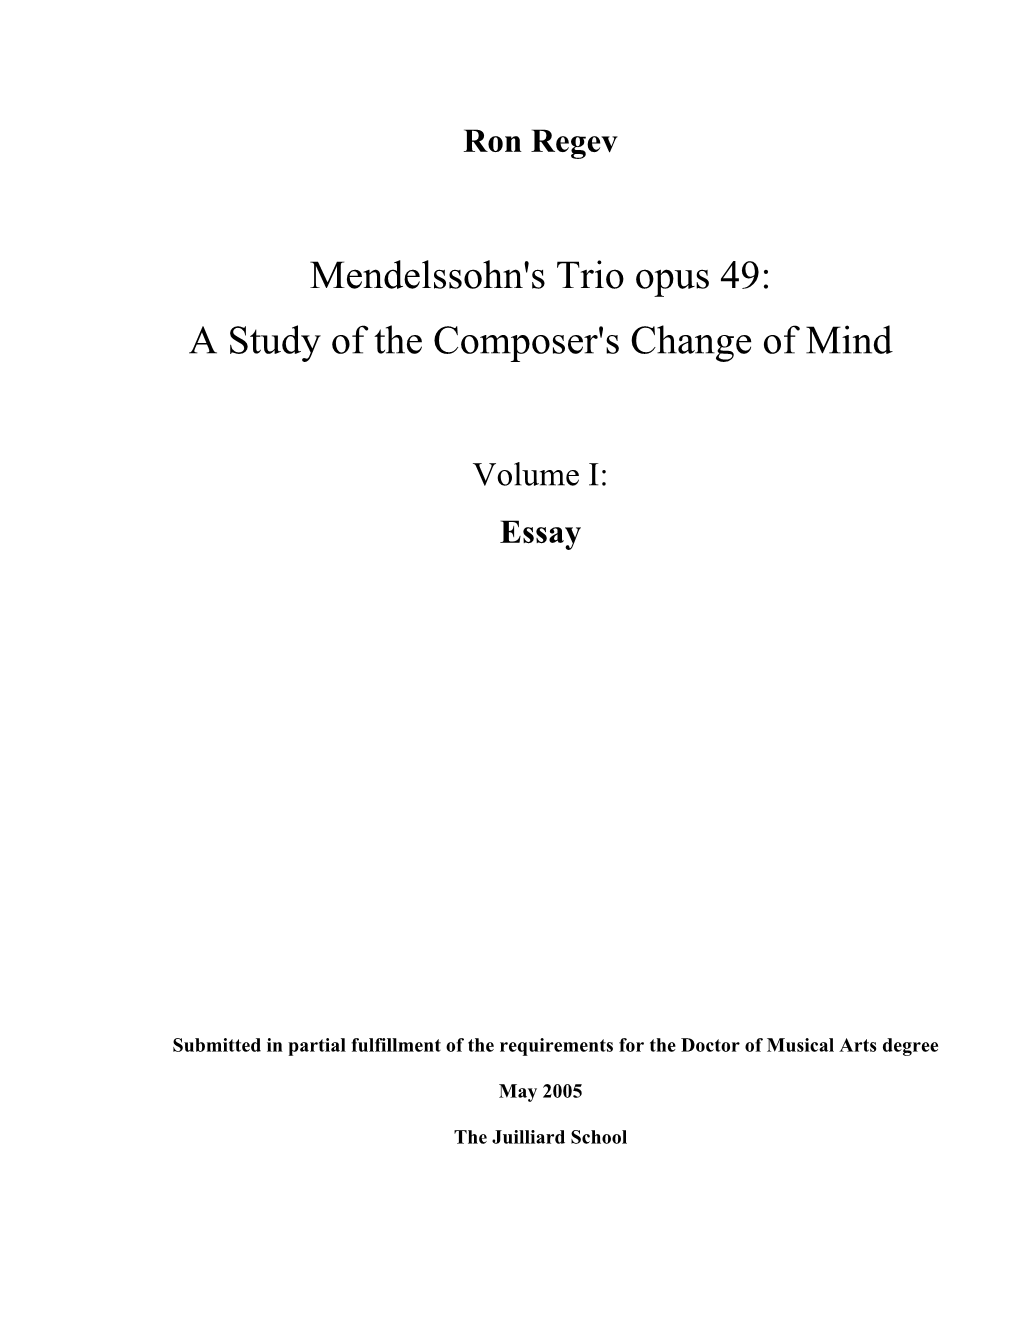 Mendelssohn's Trio Opus 49: a Study of the Composer's Change of Mind